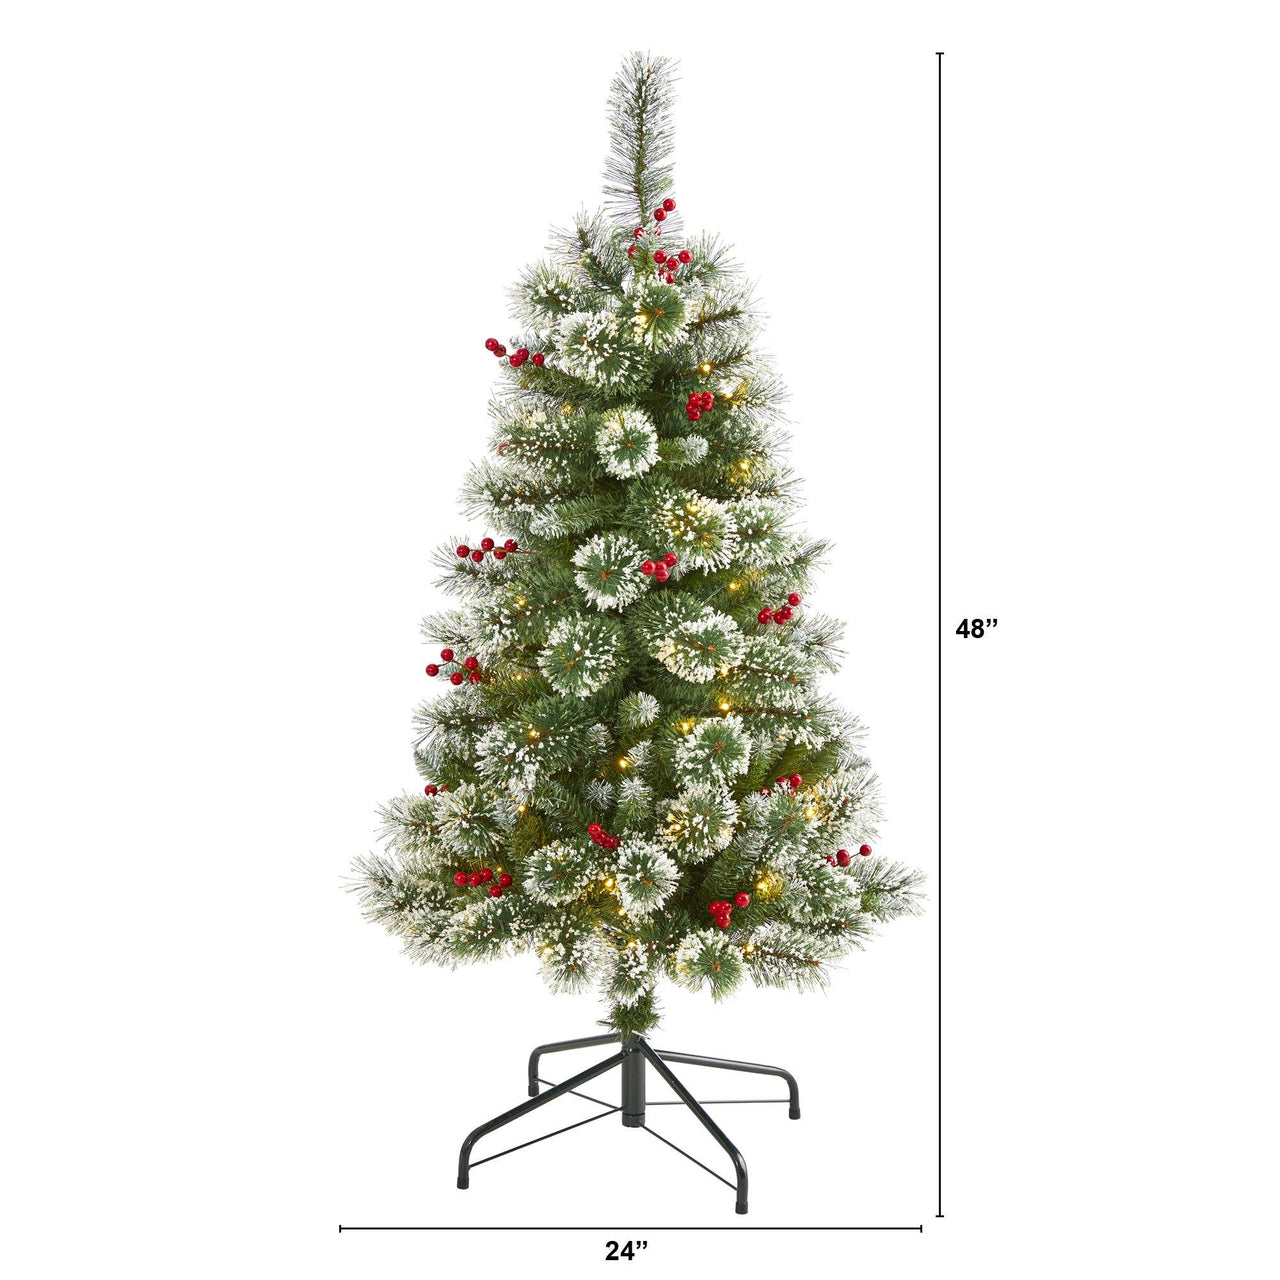 4’ Frosted Swiss Pine Artificial Christmas Tree with 100 Clear LED Lights and Berries - The Fox Decor